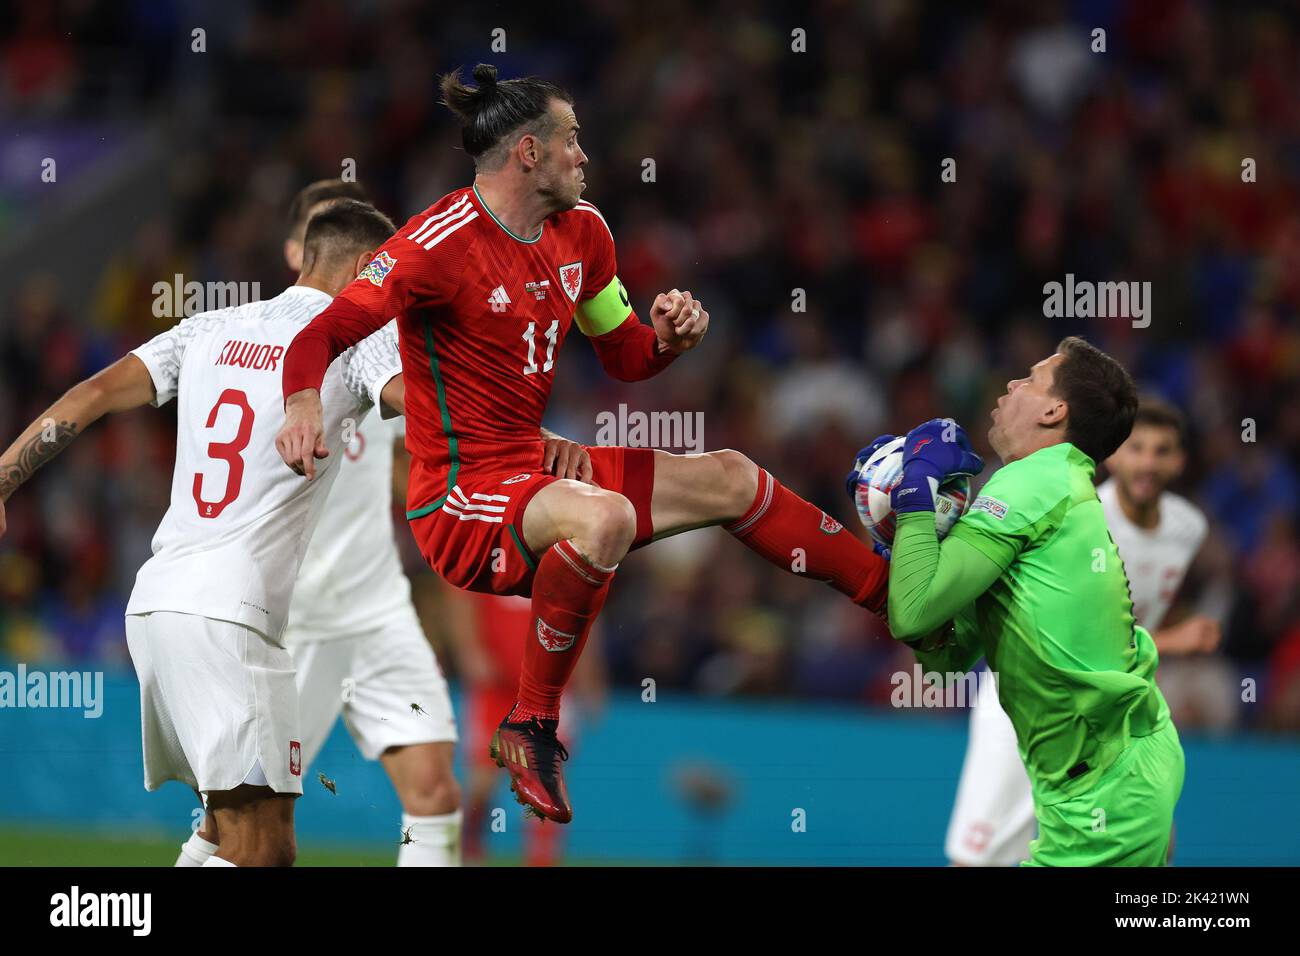 Gareth Bale of Wales (l) collides with Wojciech Szczesny, the goalkeeper of Poland.  UEFA Nations league, group D match, Wales v Poland at the Cardiff Stock Photo